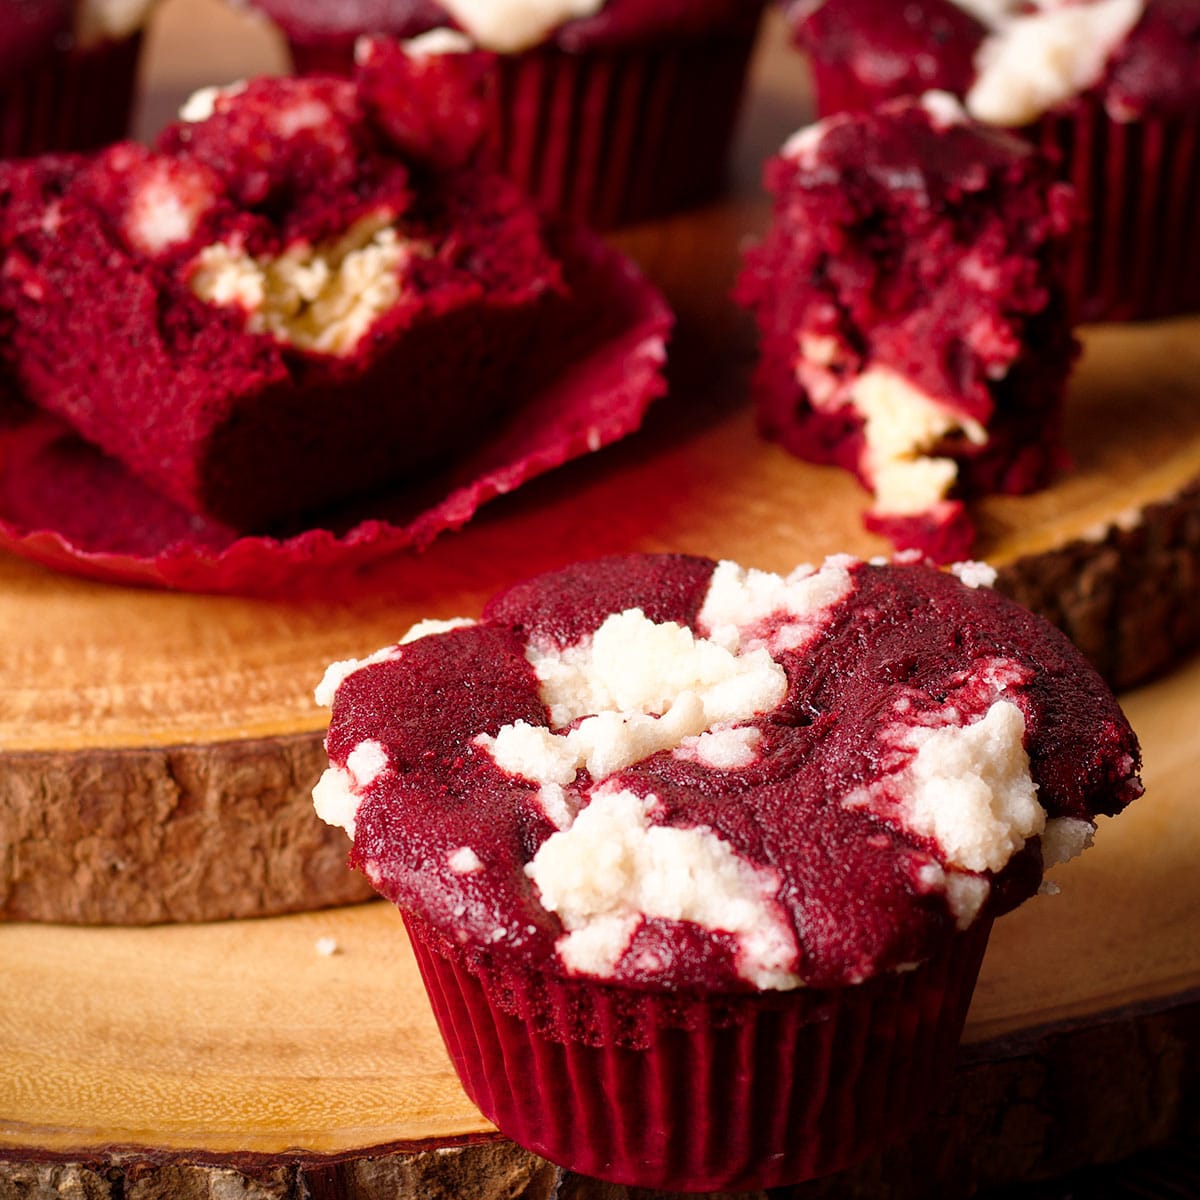 Several red velvet muffins with cream cheese filling and crumb topping on a wood serving board.